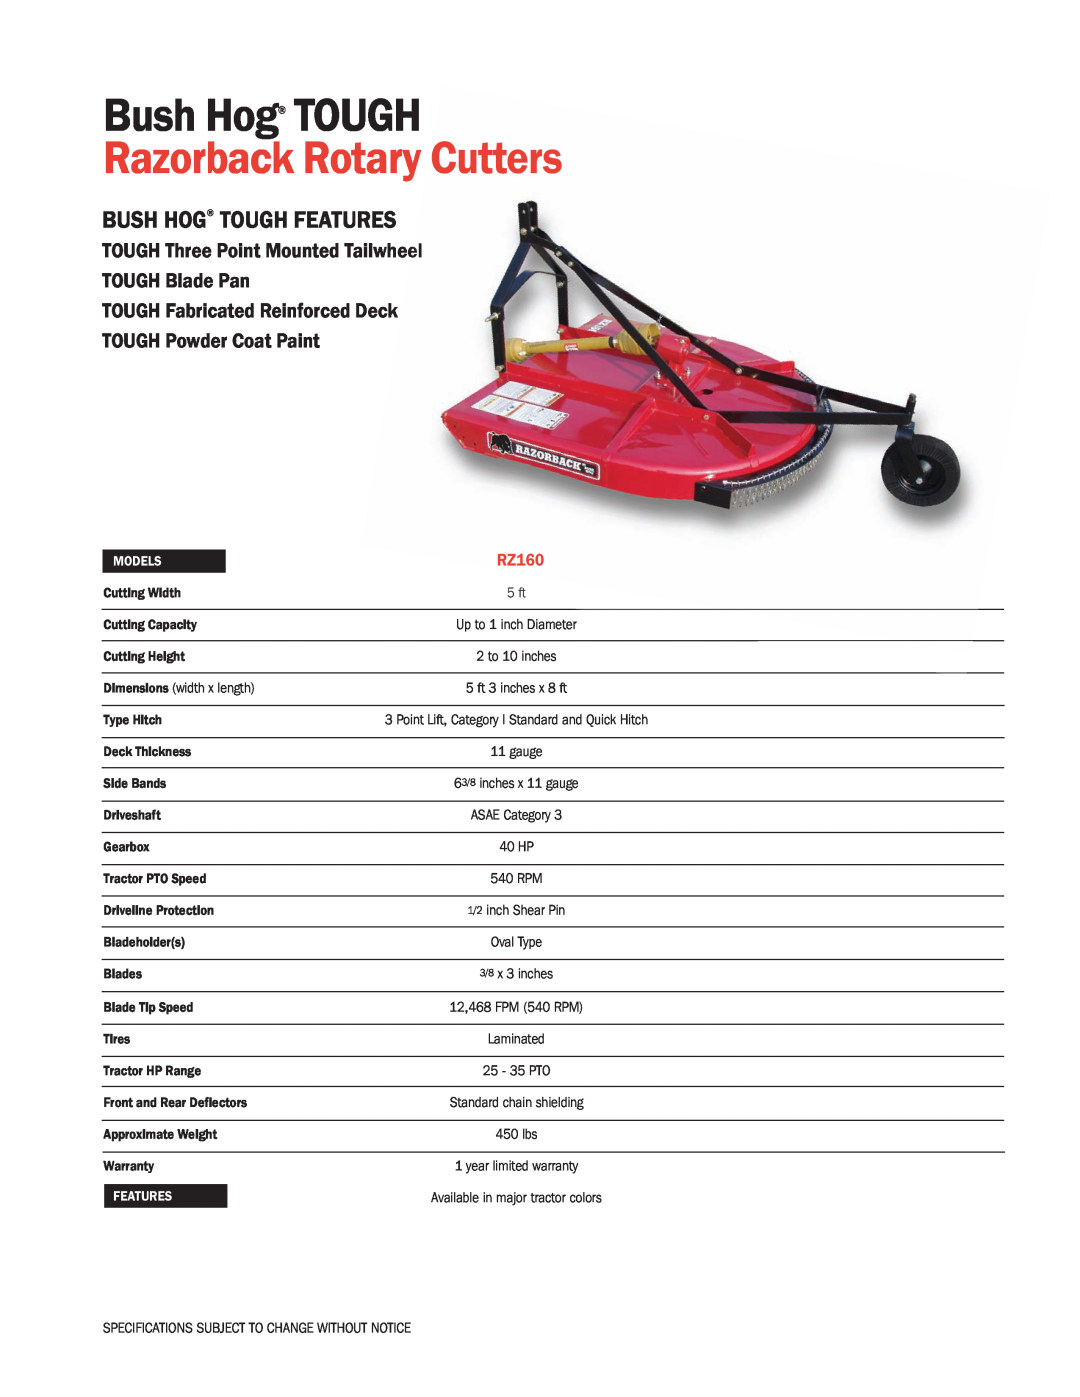 Bush Hog RZ160 specifications Razorback Rotary Cutters, Bush Hog TOUGH Features, TOUGH Three Point Mounted Tailwheel 